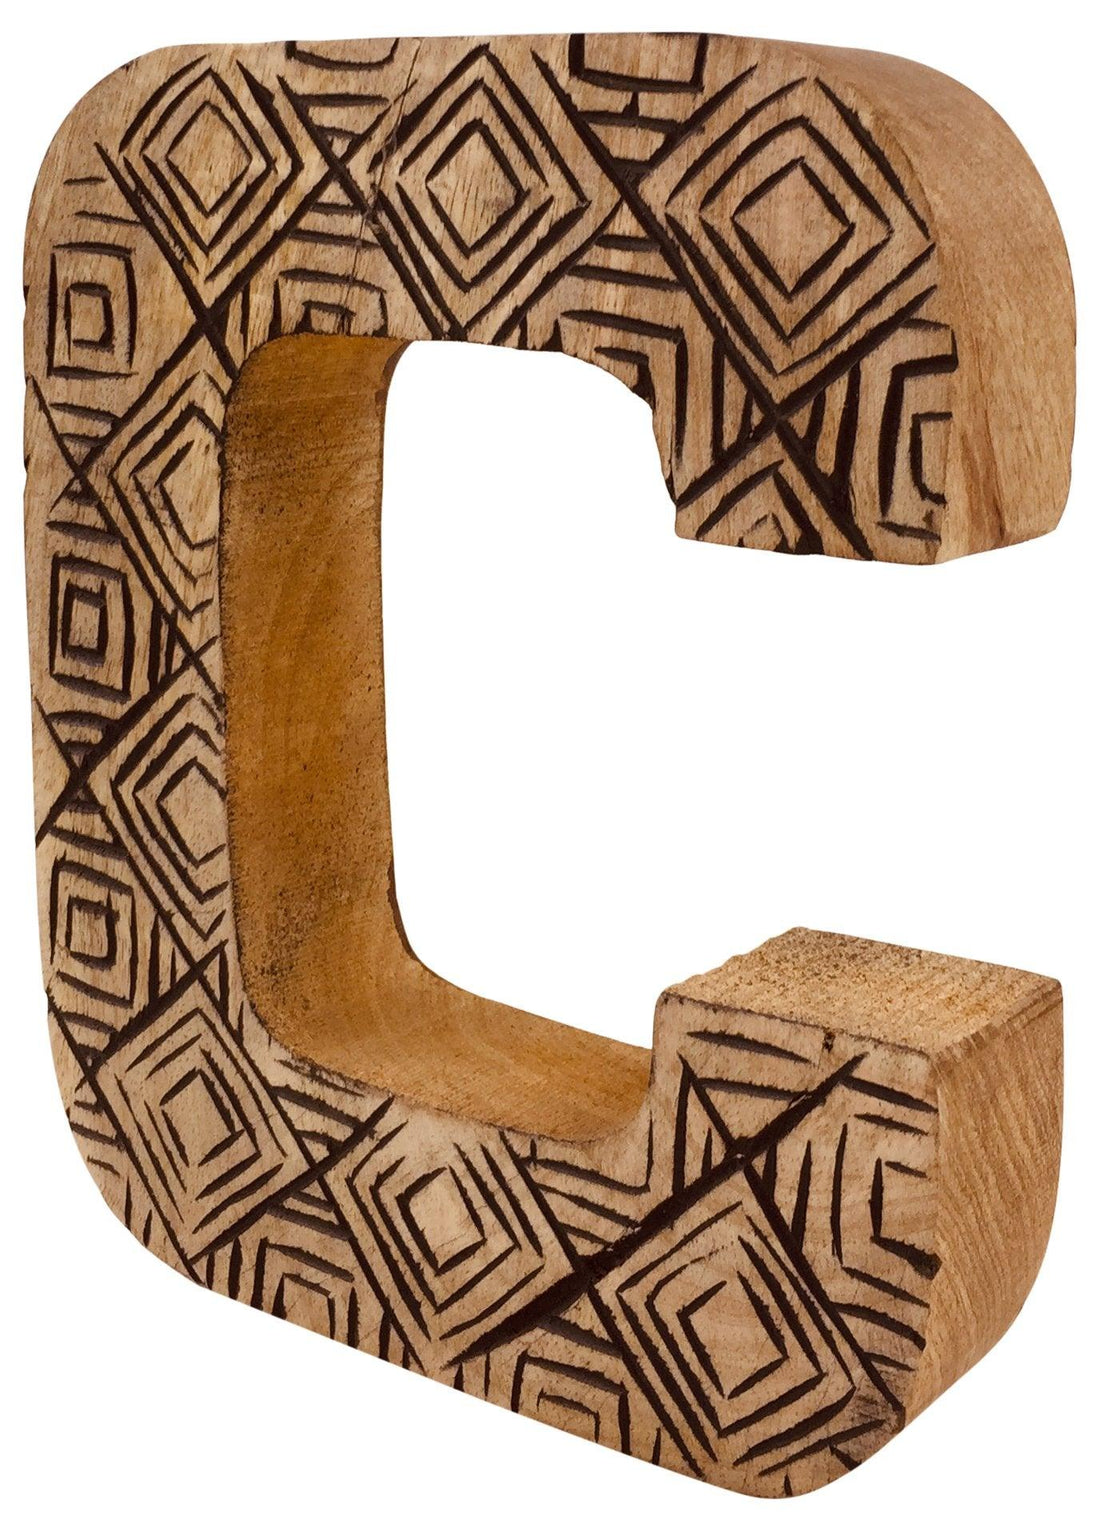 Hand Carved Wooden Geometric Letter C - £12.99 - Single Letters 